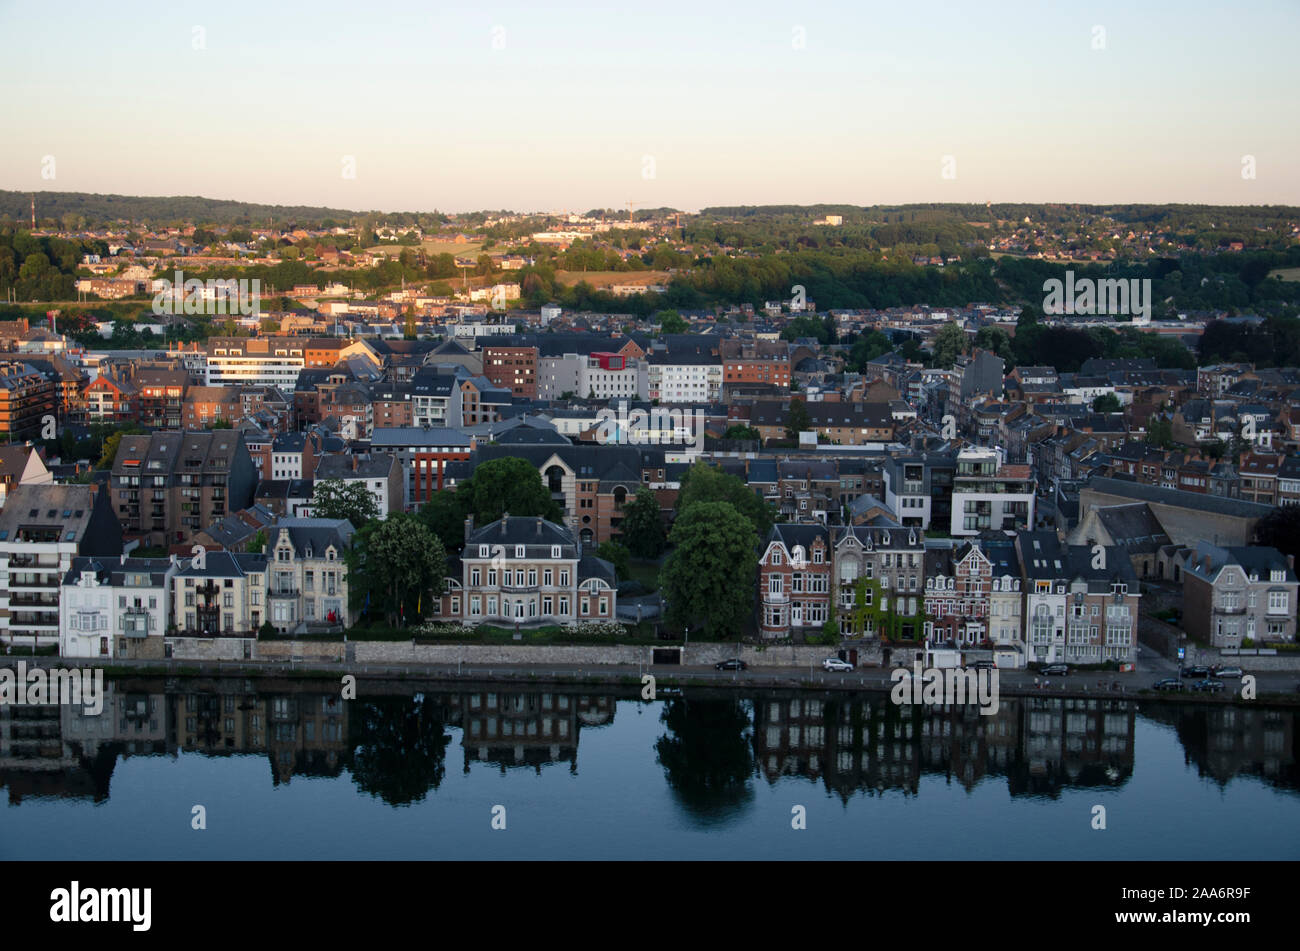 Aerial view of the city and Meuse river, Namur, Belgium, Europe Stock Photo